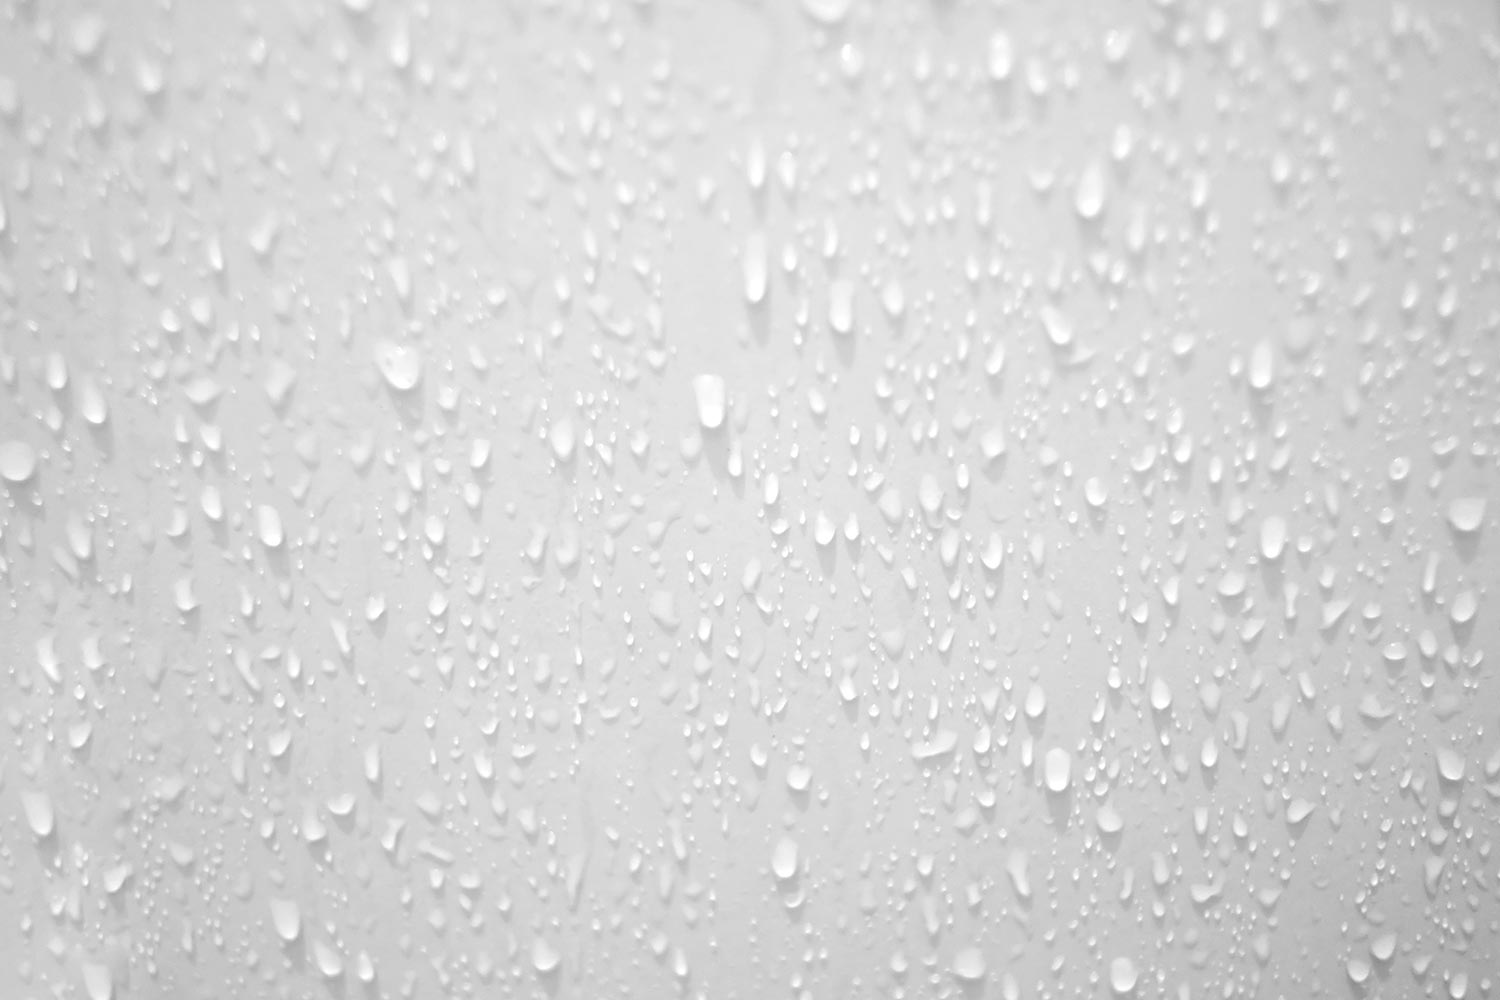 Blurred many water droplets on a white wall in a restroom area